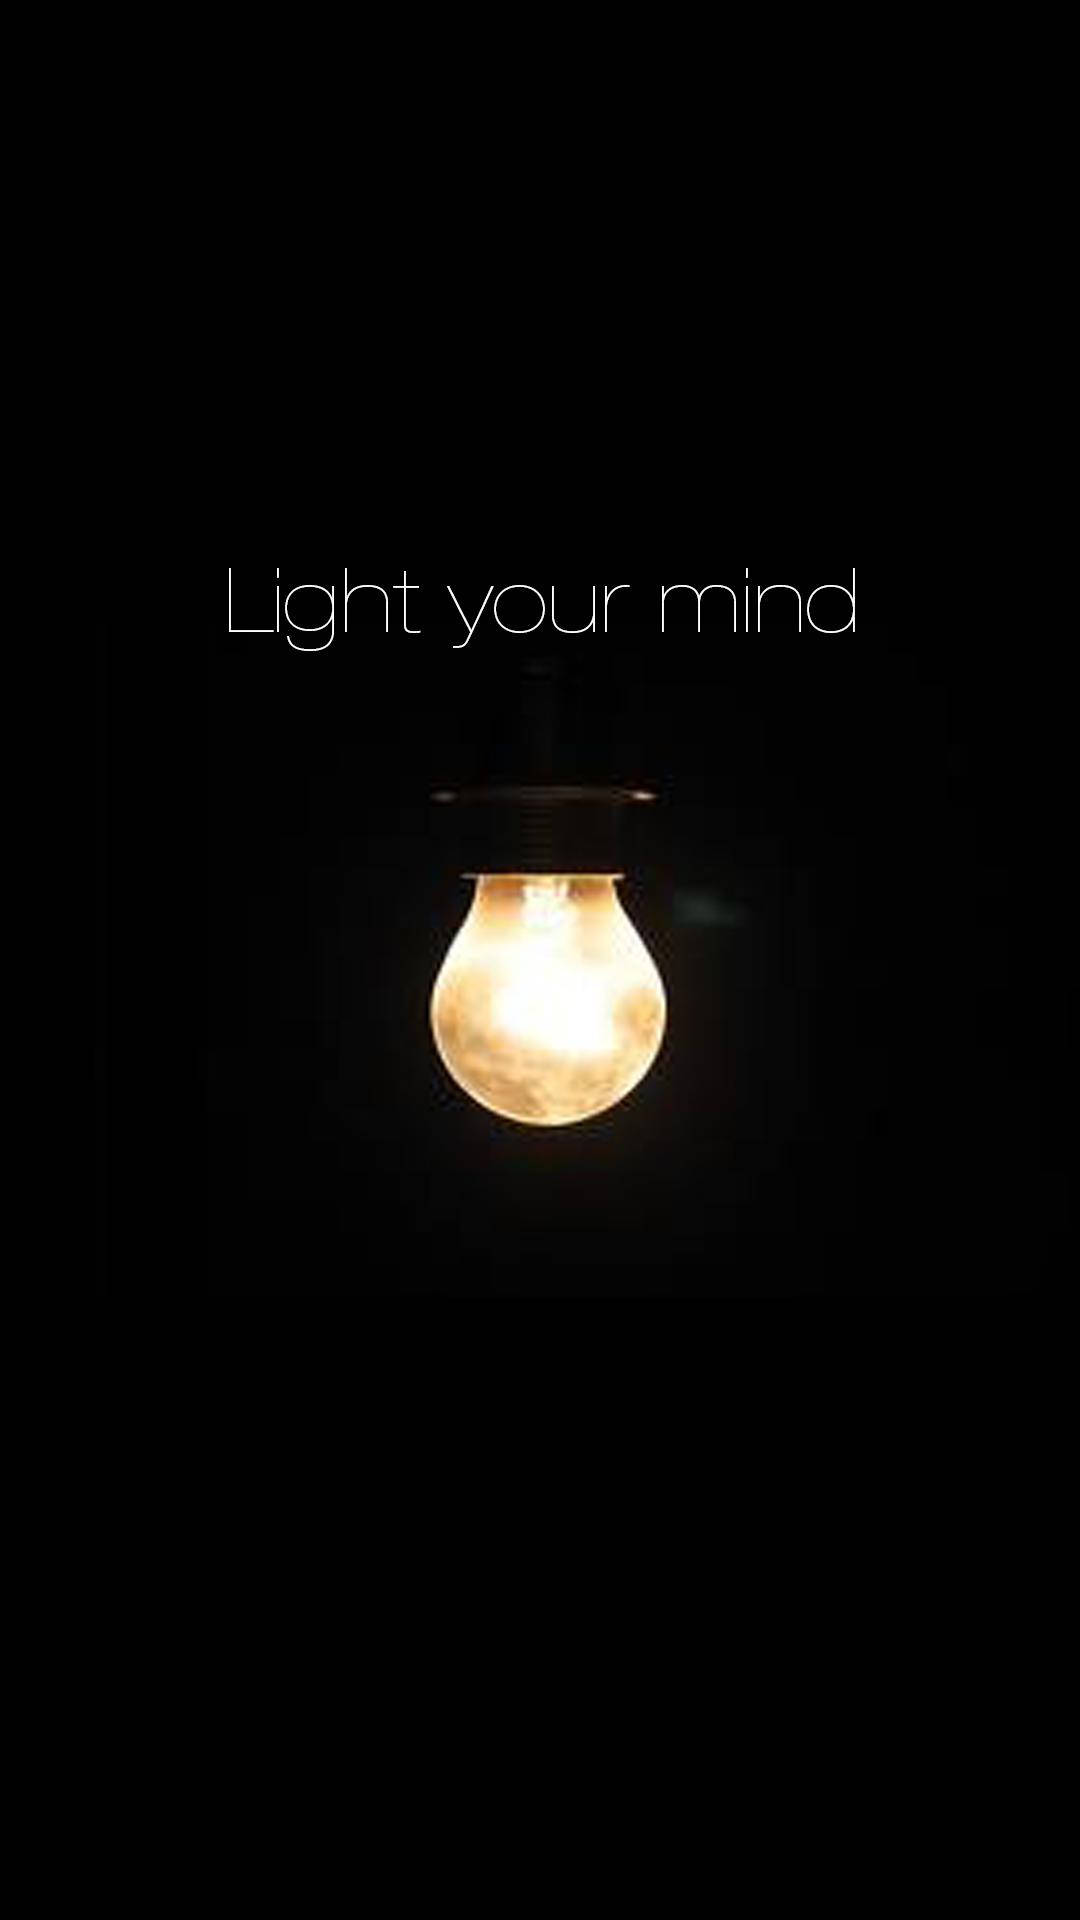 Light Your Mind Phone Background Wallpaper